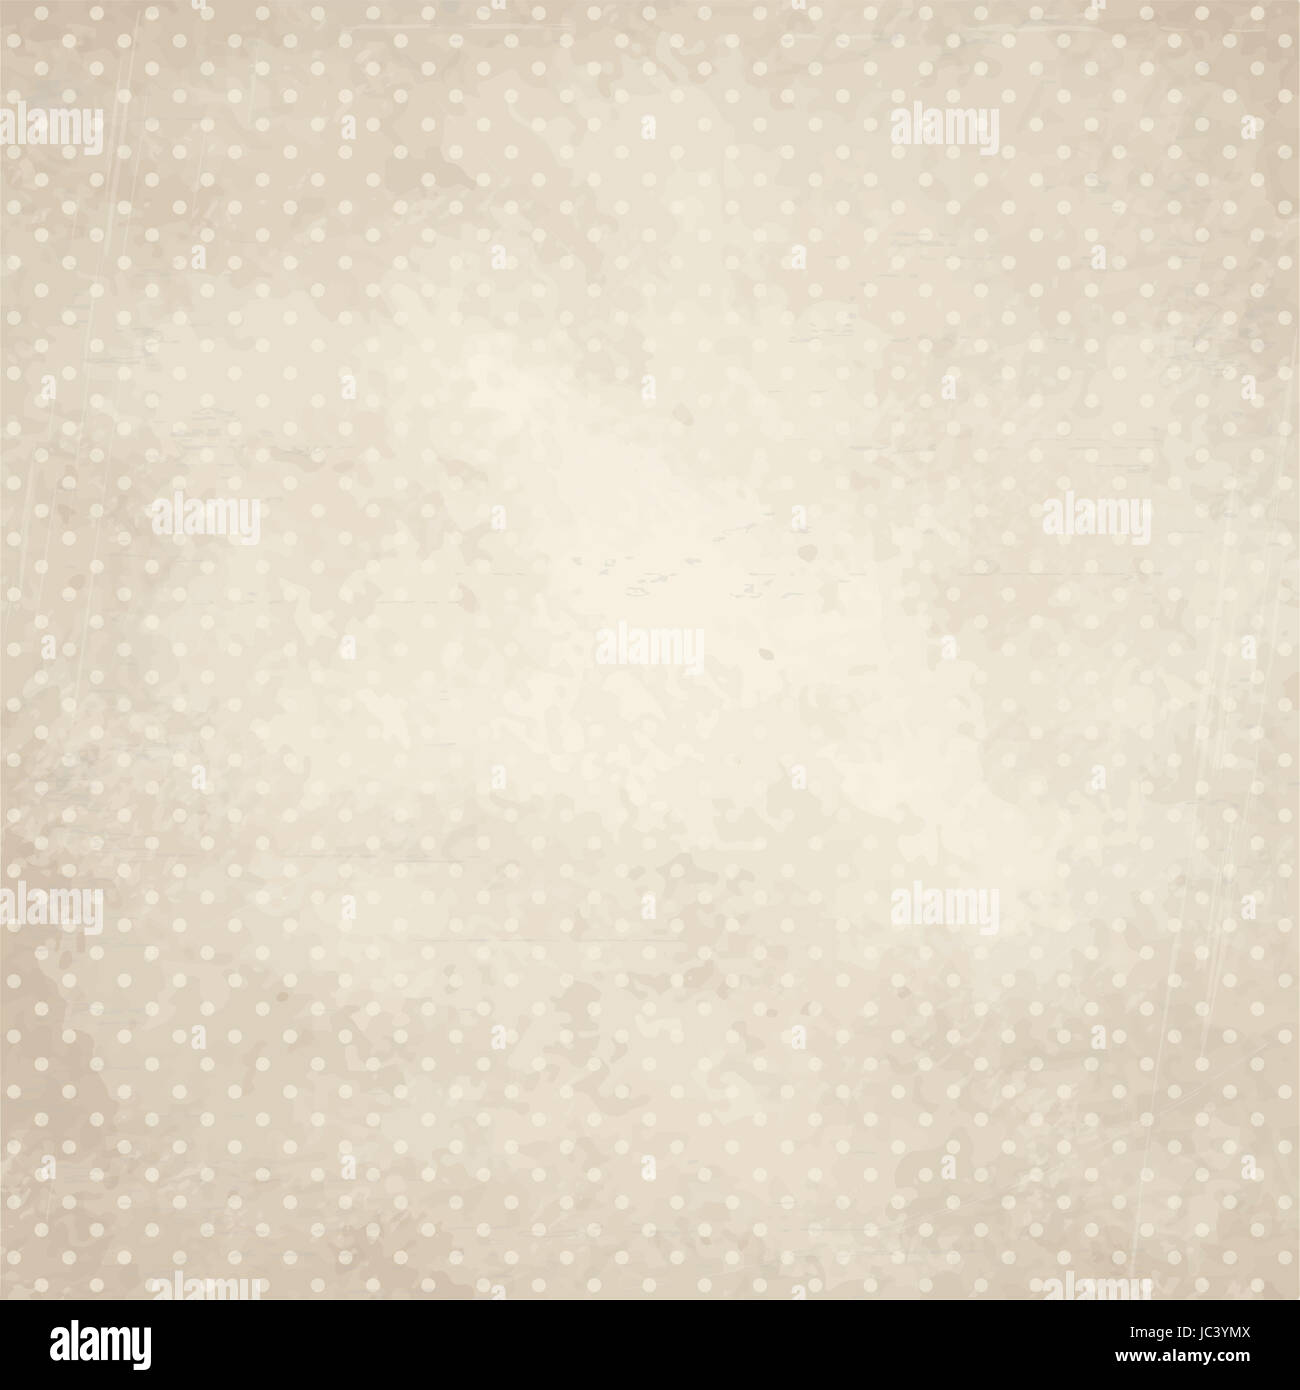 vector of old vintage paper background with points Stock Photo